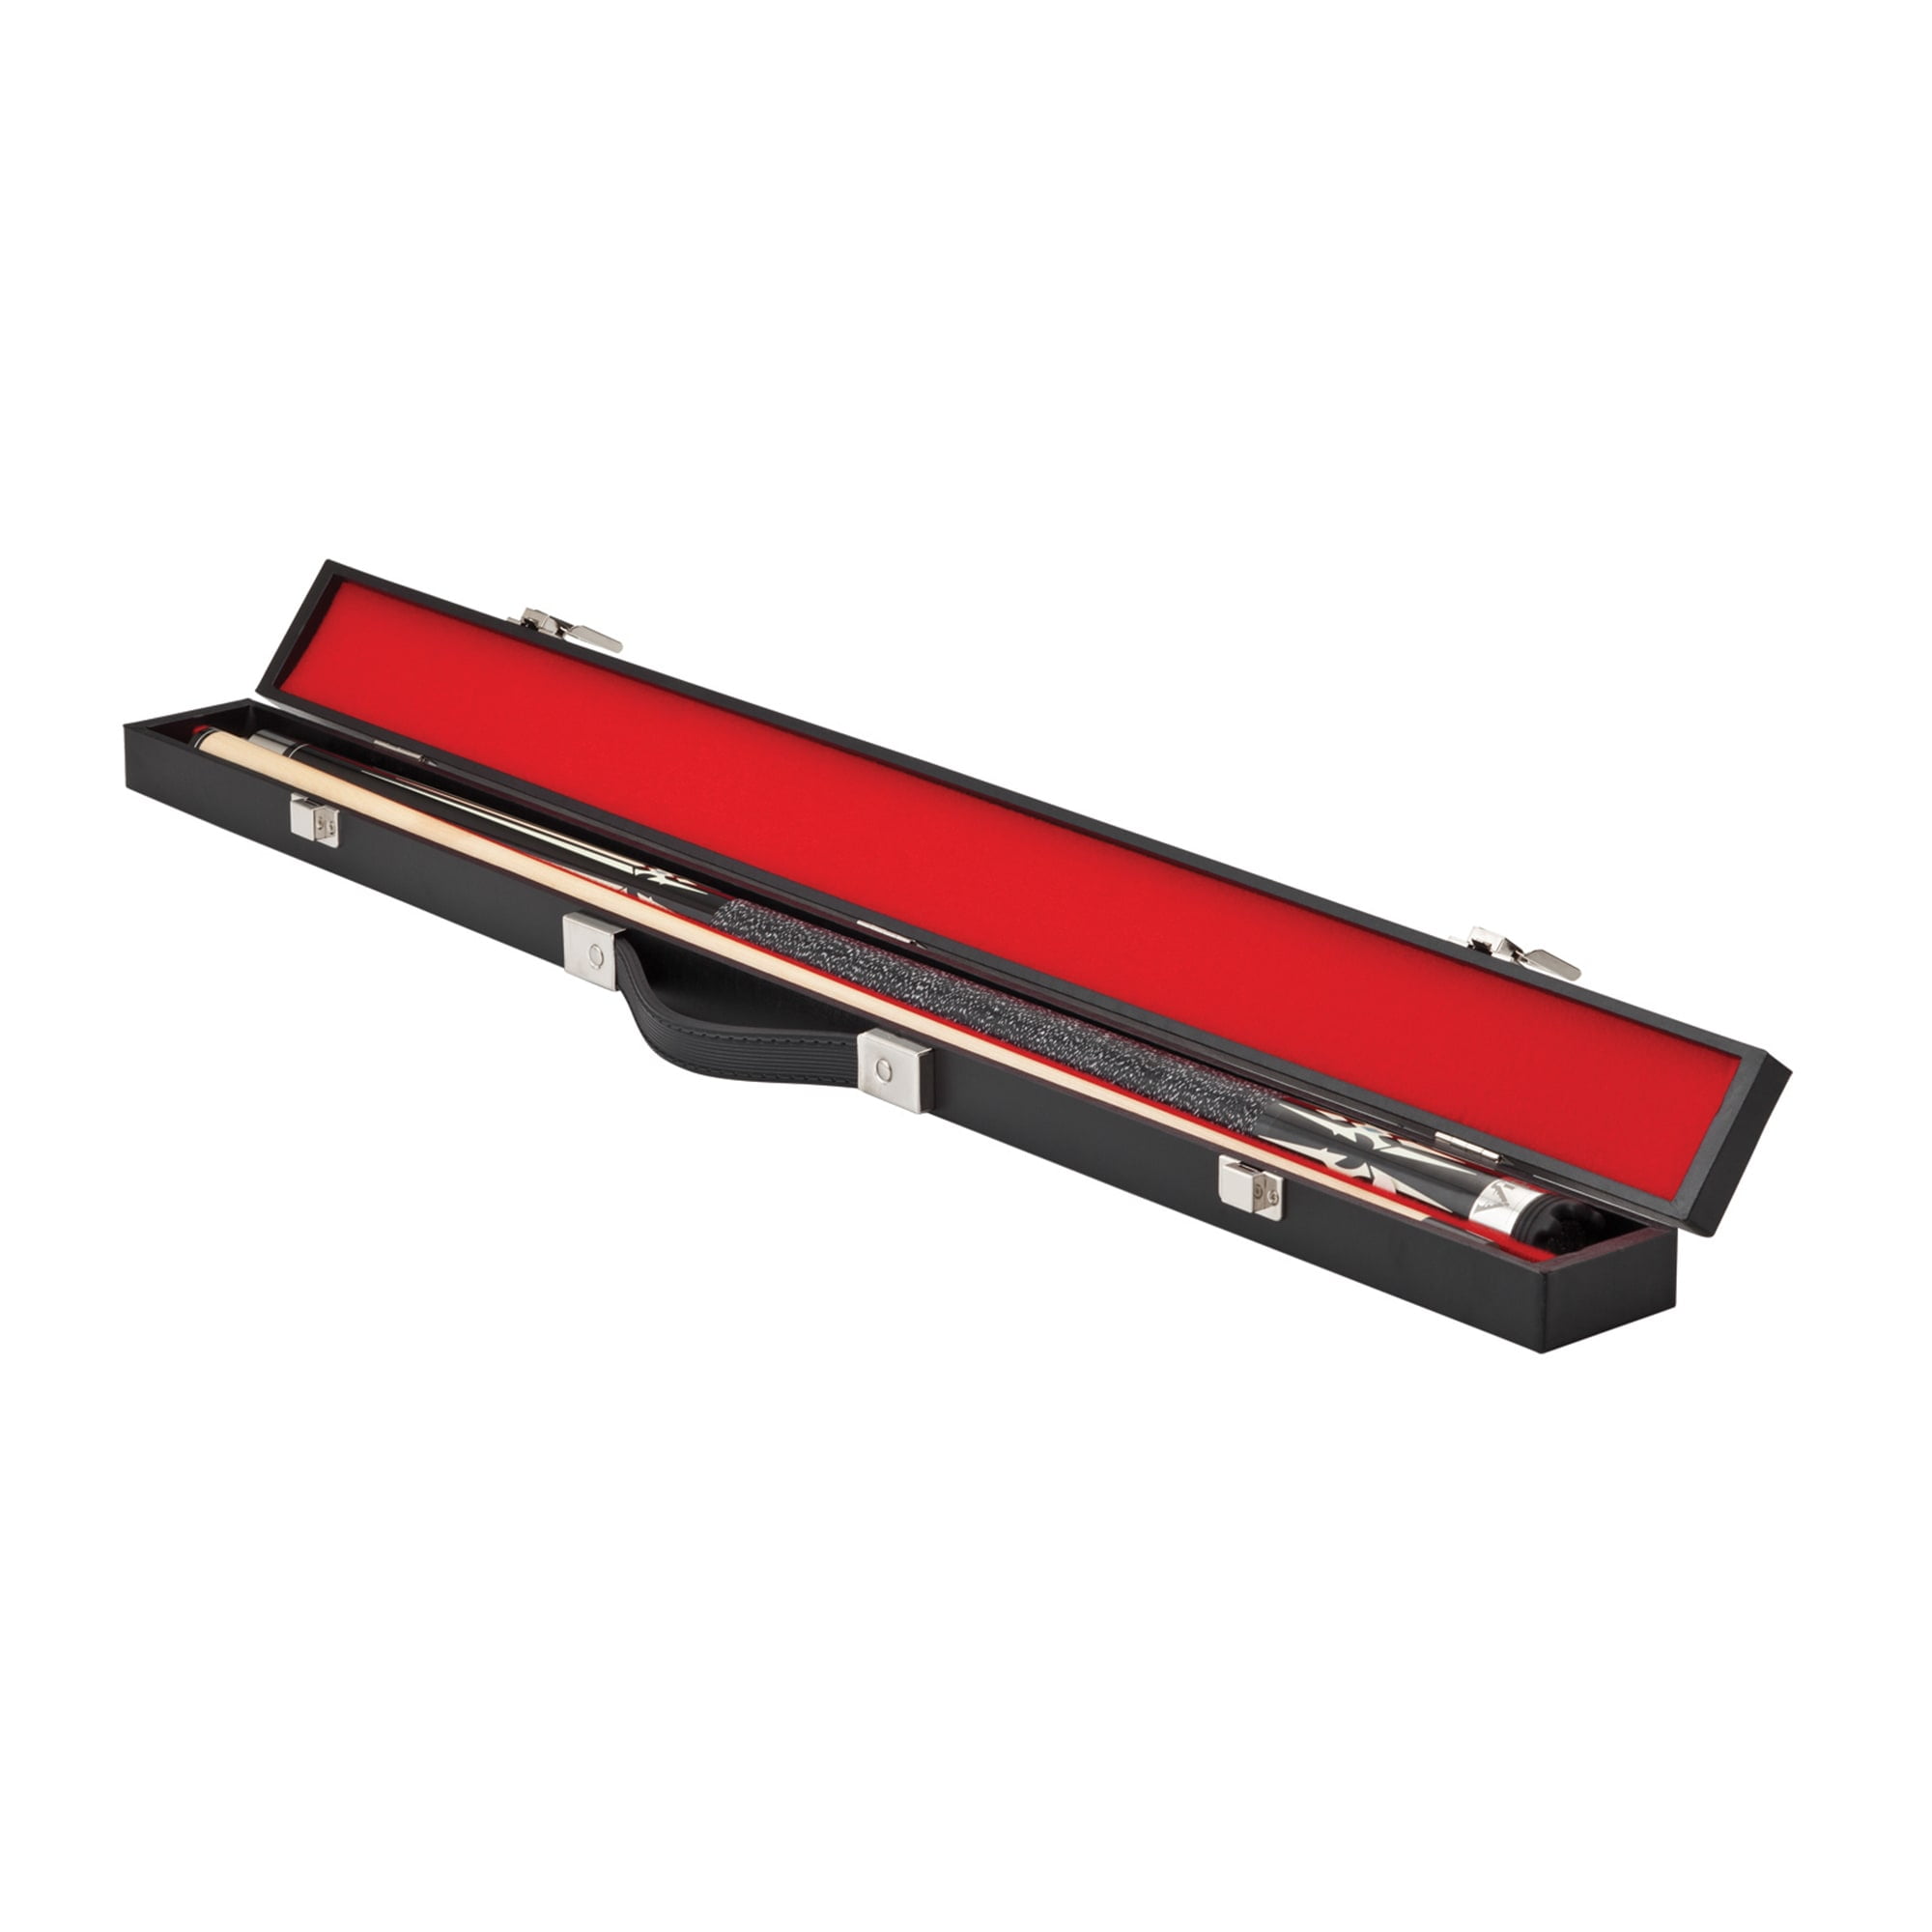 Impact Resistant Details about   Deluxe Hard Cue Case Billiards Pool Snooker 1 Butt, 2 Shafts 